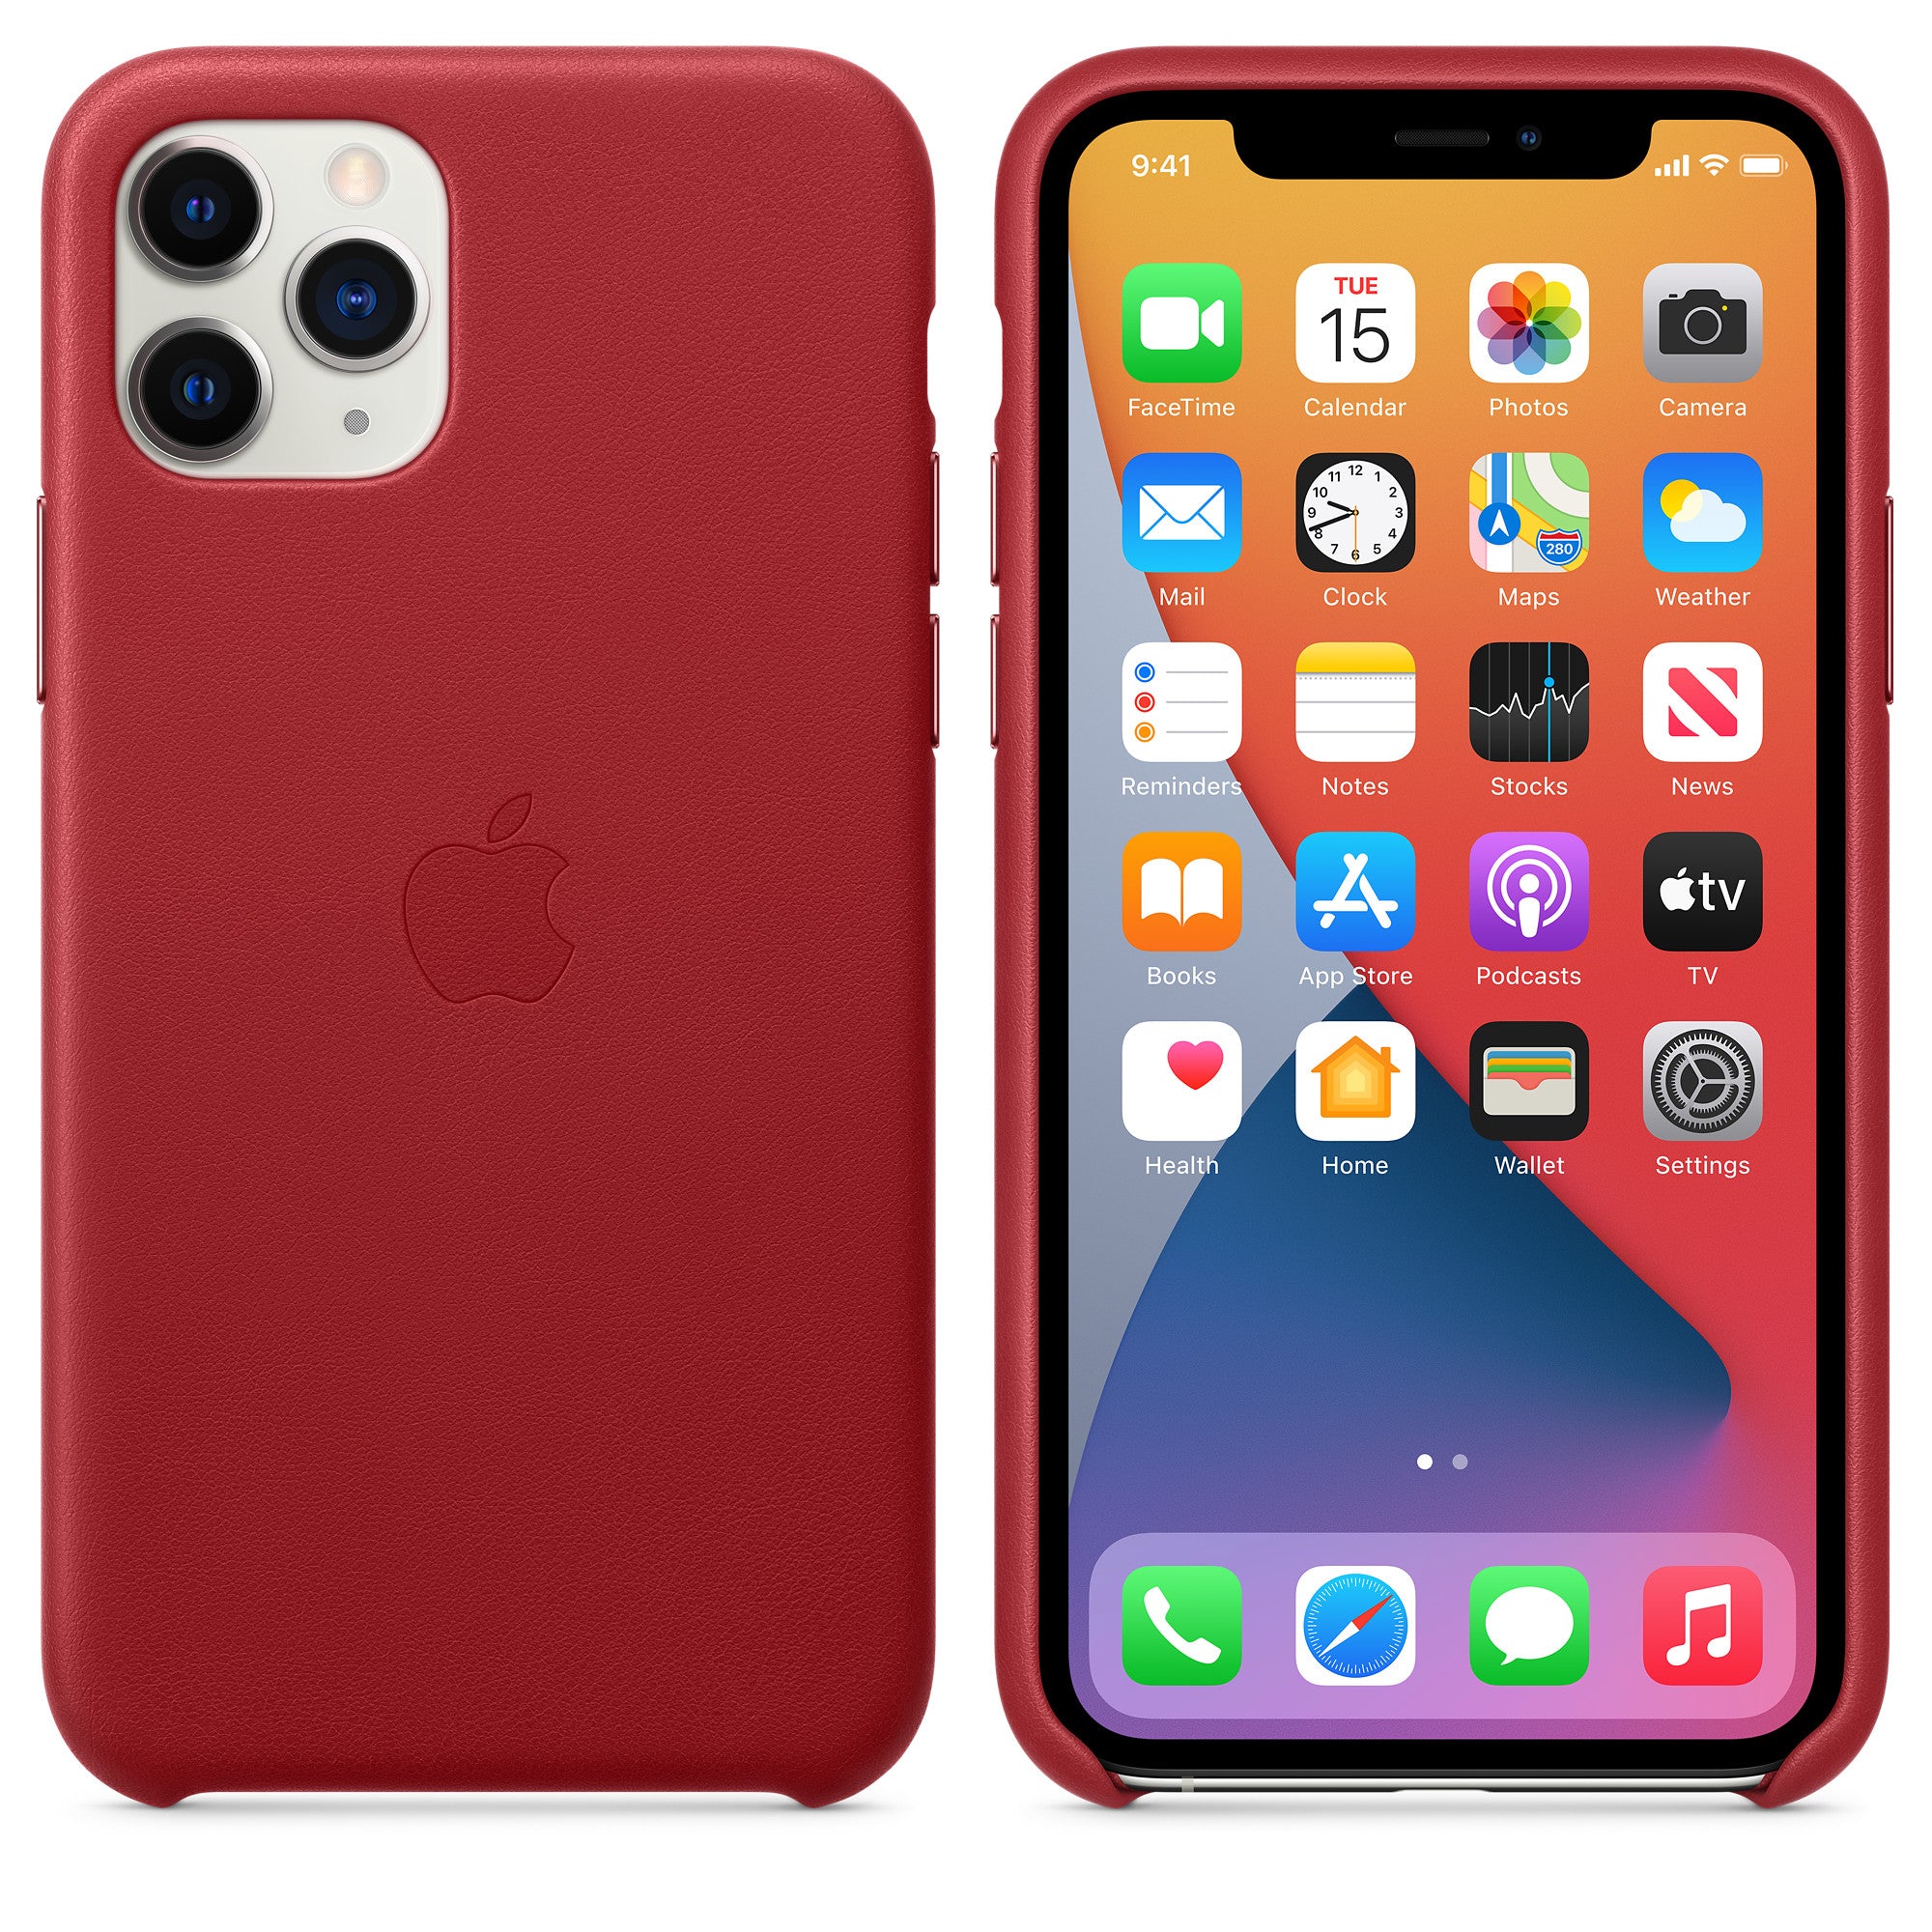 Apple iPhone 11 Pro Max Leather Case - Red - Brand New